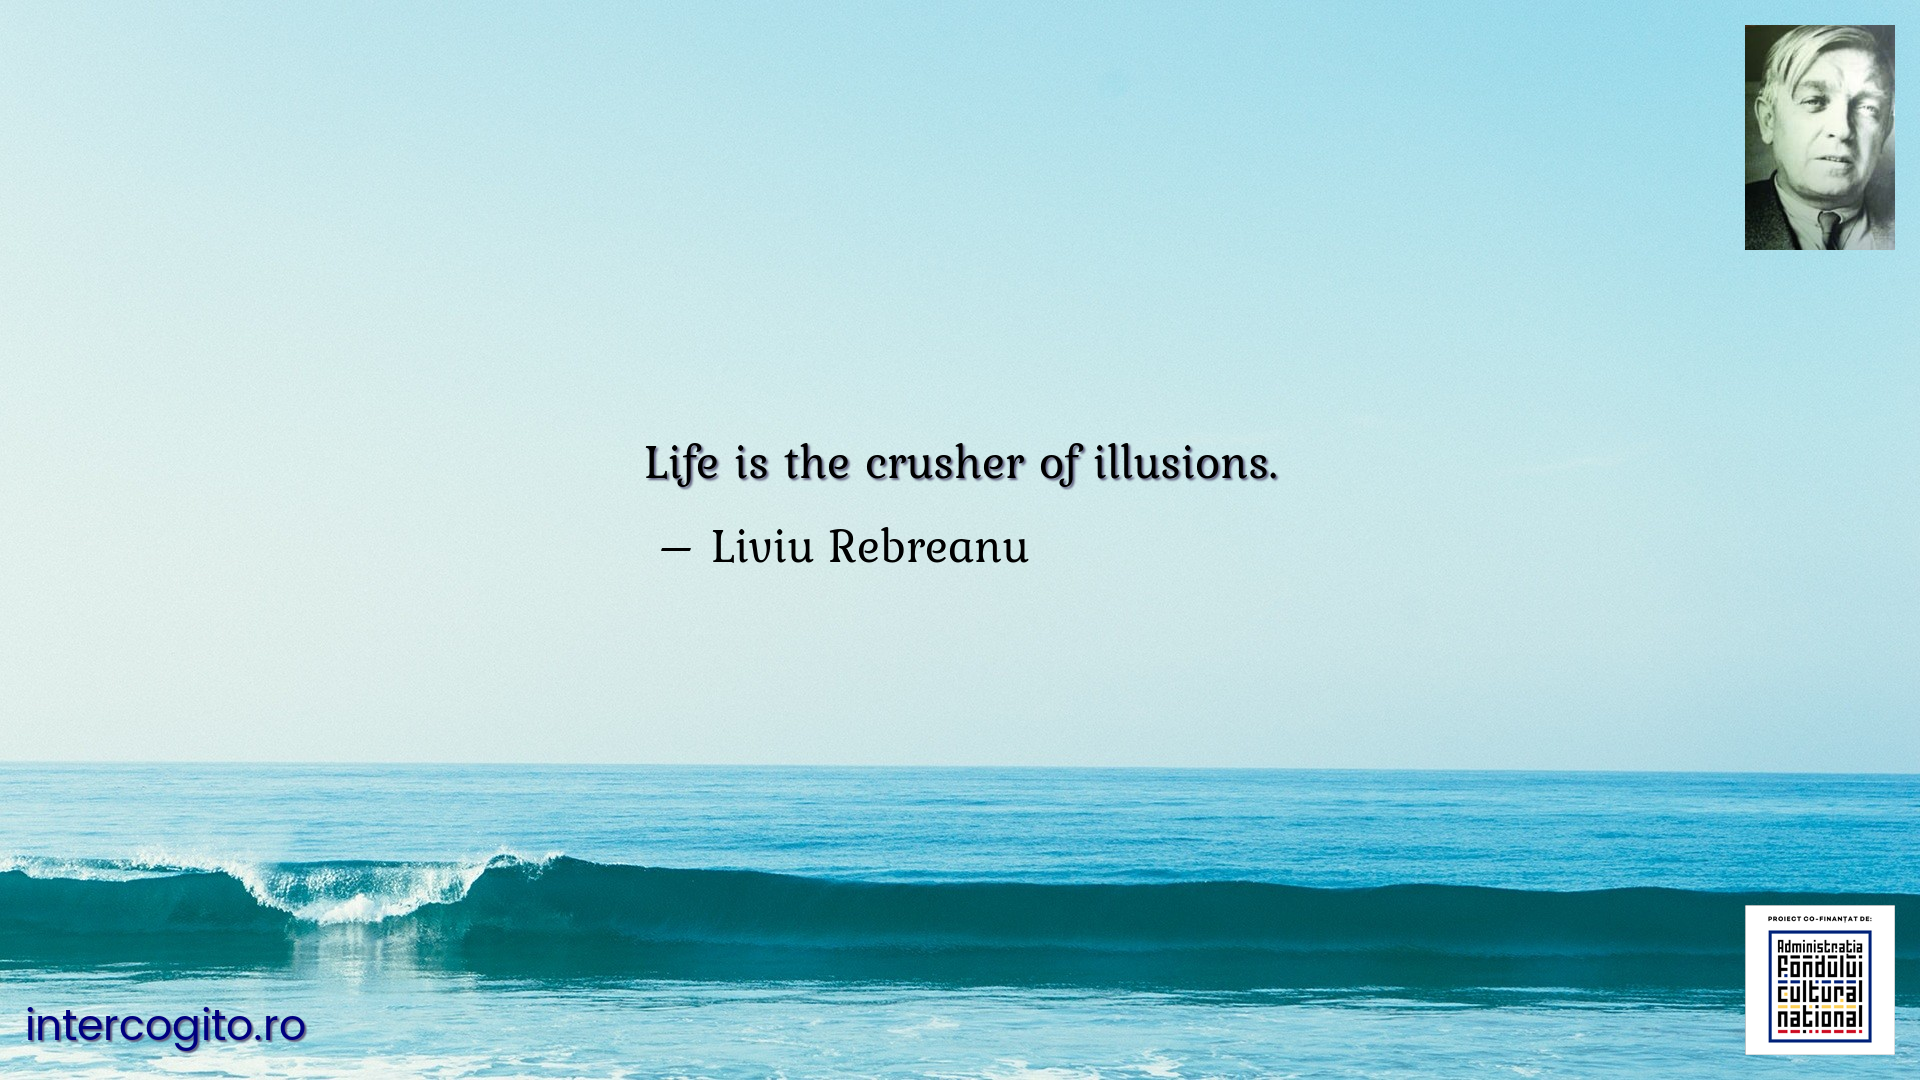 Life is the crusher of illusions.